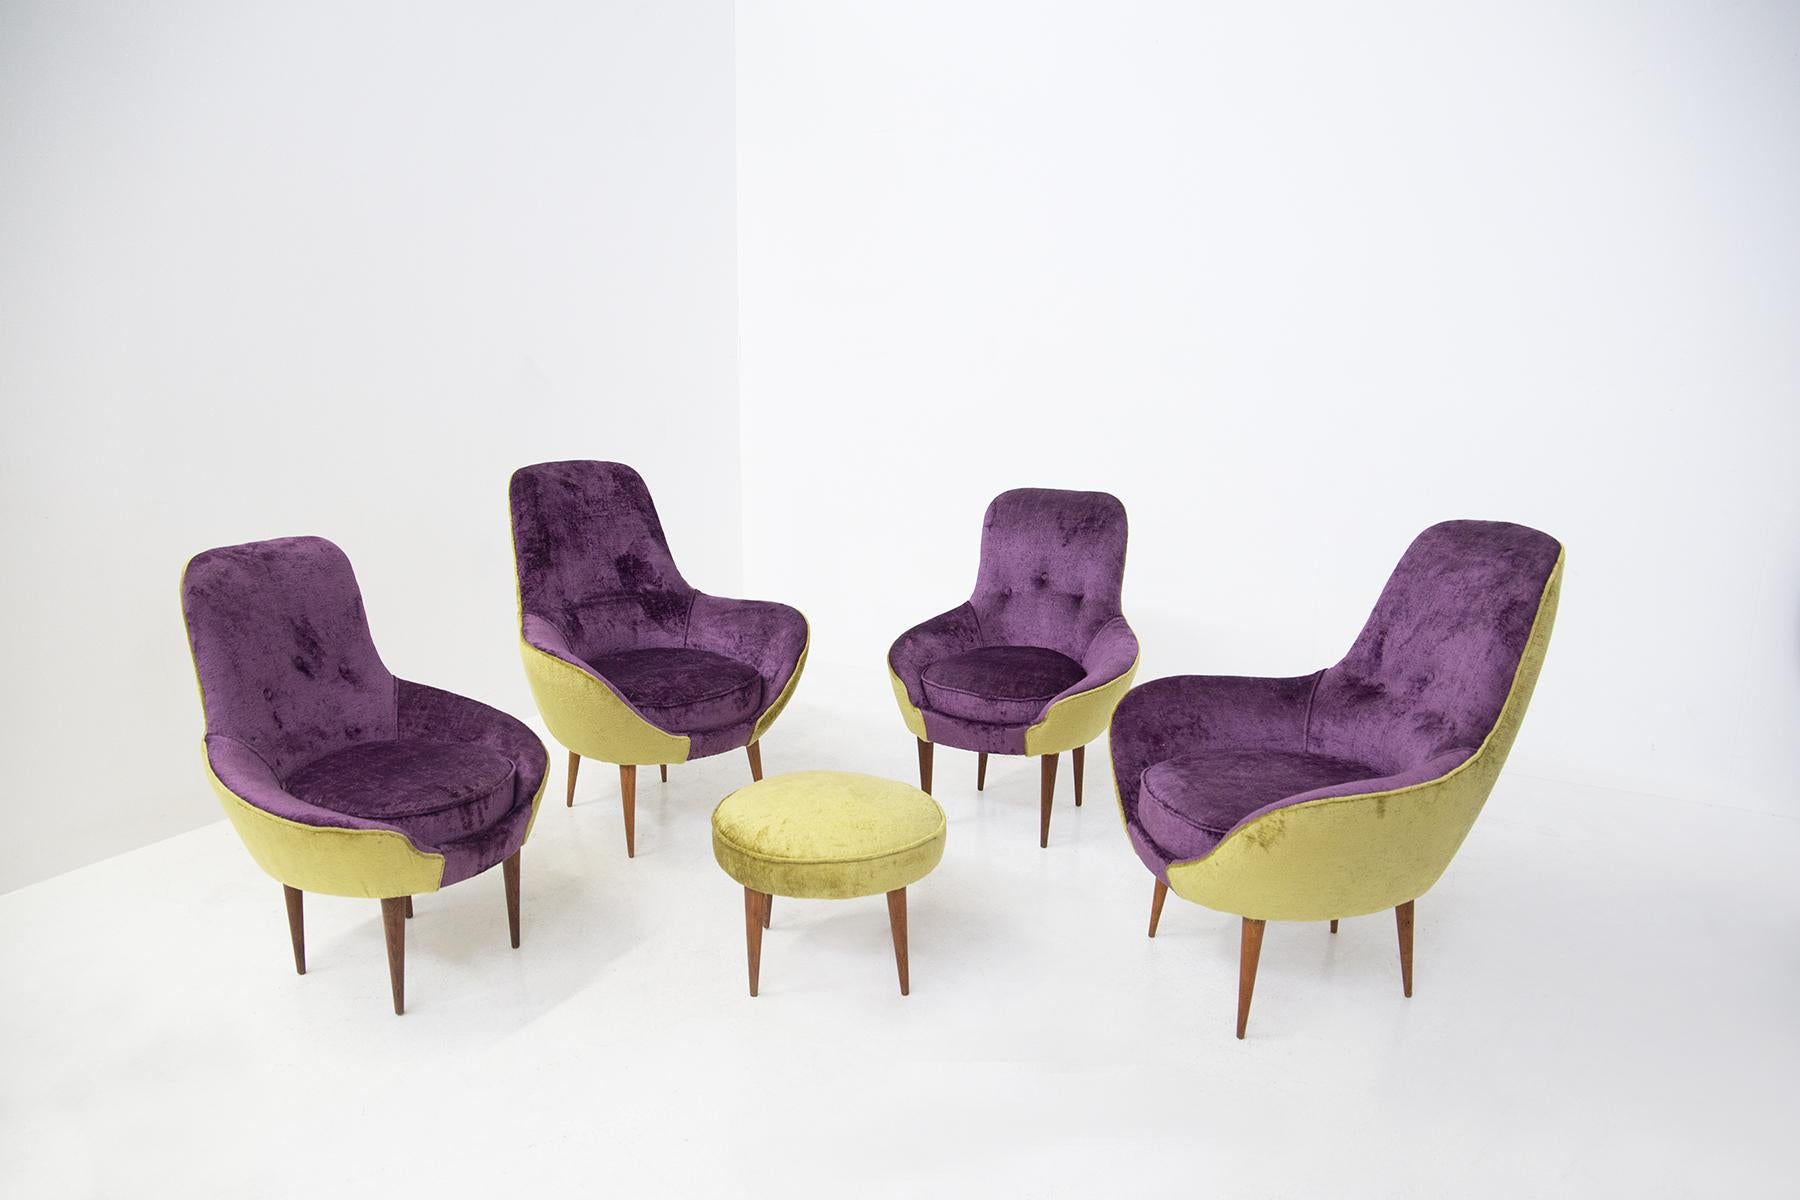 Small Vintage Wooden Armchairs in Velvet Purple and Green with Pouf For Sale 8